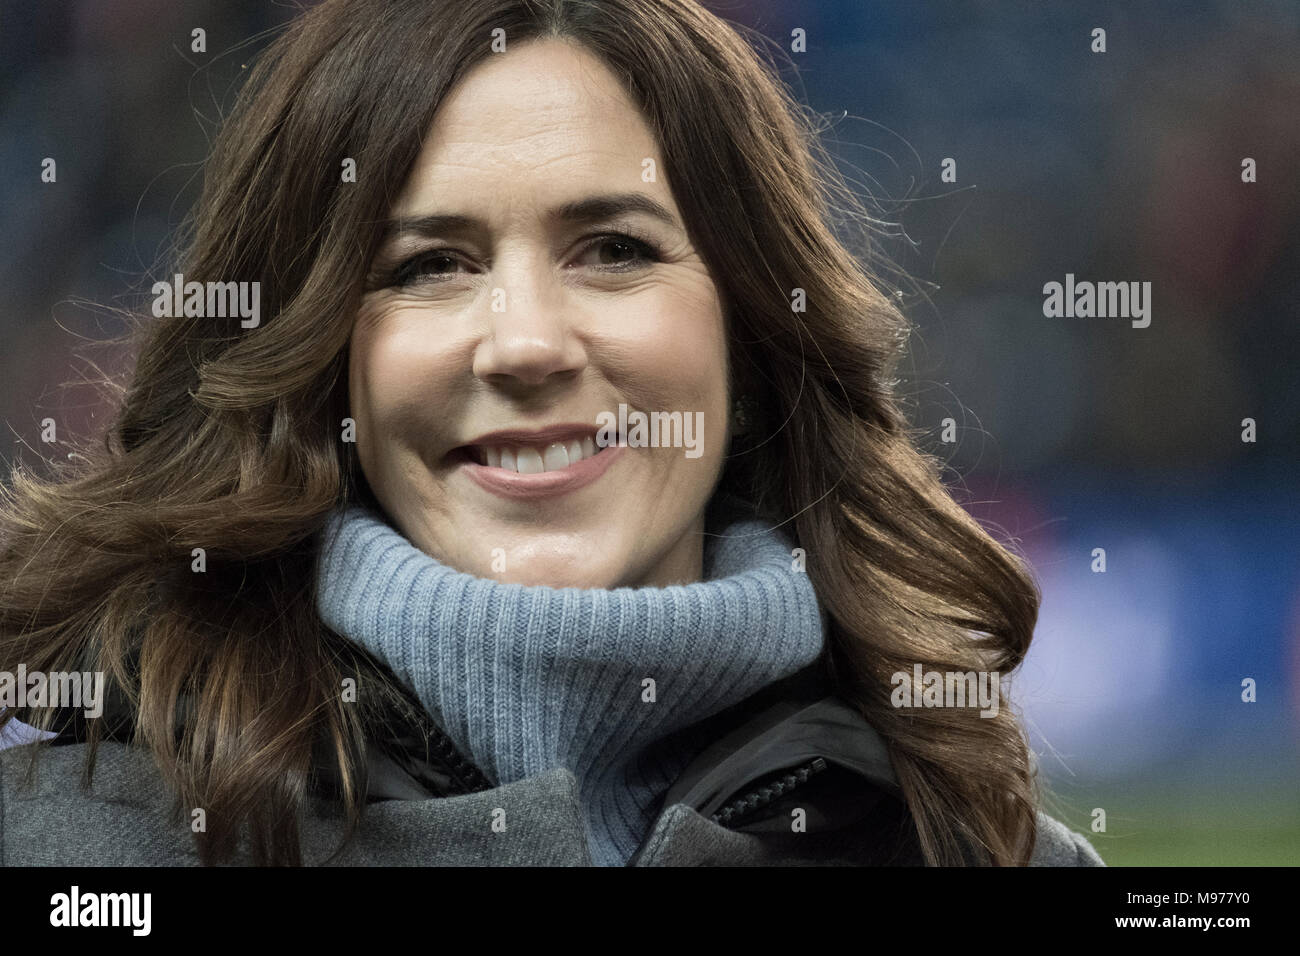 Brøndby, Denmark. 22nd Mar, 2018. Mary, Crown Princess of Denmark, seen at Brøndby Stadion before the football friendly between Denmark and Panama. The Mary Foundation has been awarded the UEFA Foundation for Children Donation. (Photo credit: Gonzales Photo - Kim M. Leland). Credit: Gonzales Photo/Alamy Live News Stock Photo